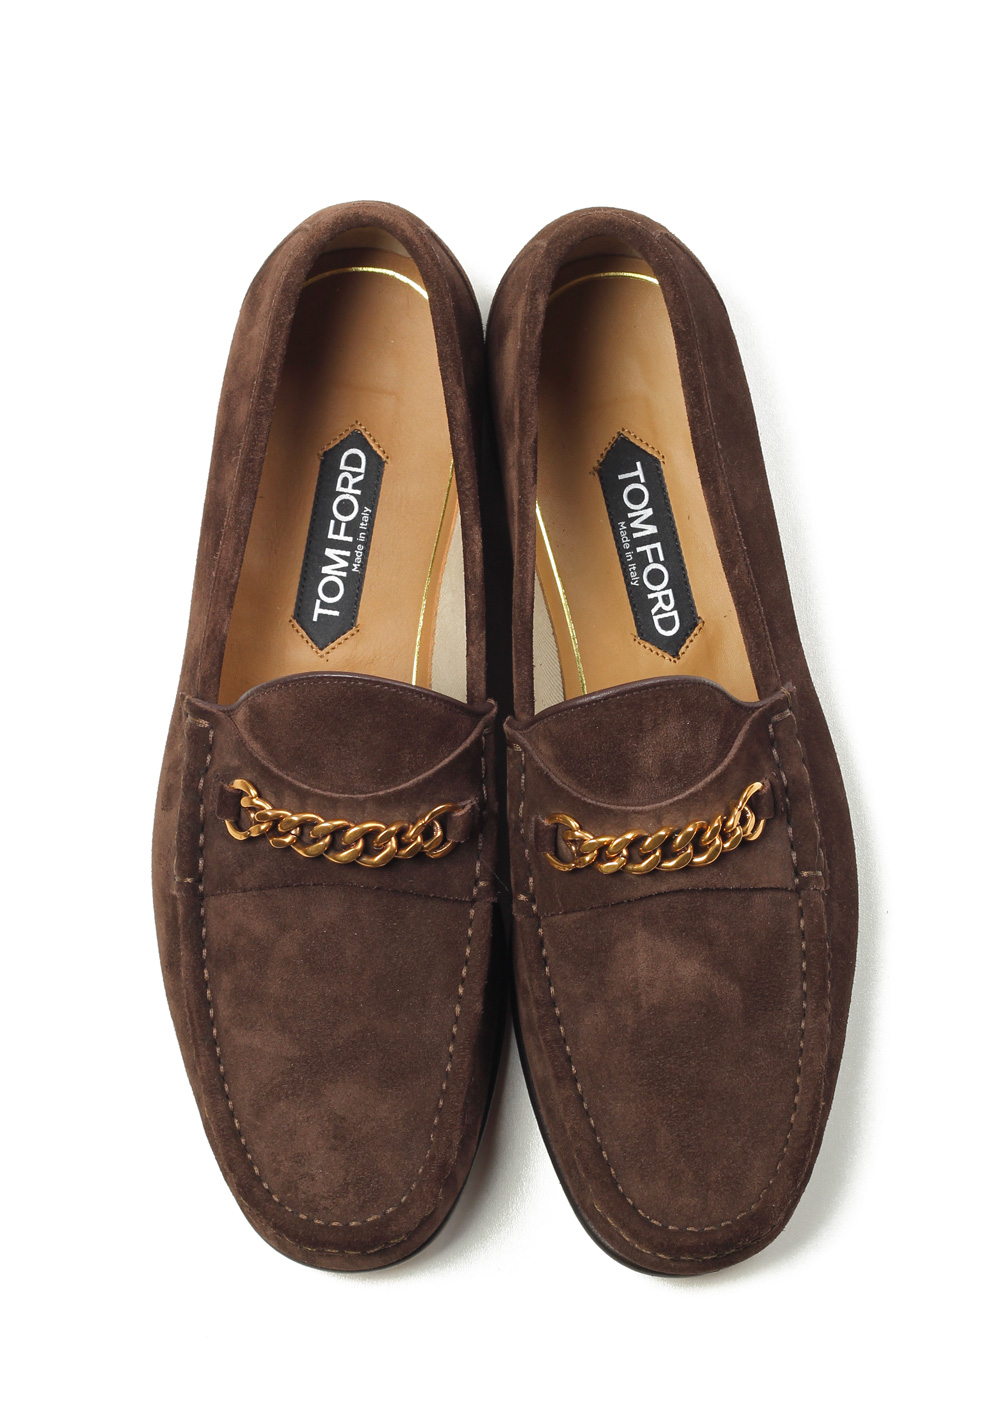 TOM FORD York Brown Suede Chain Loafers Shoes Size 11 UK / 12 U.S. | Costume Limité